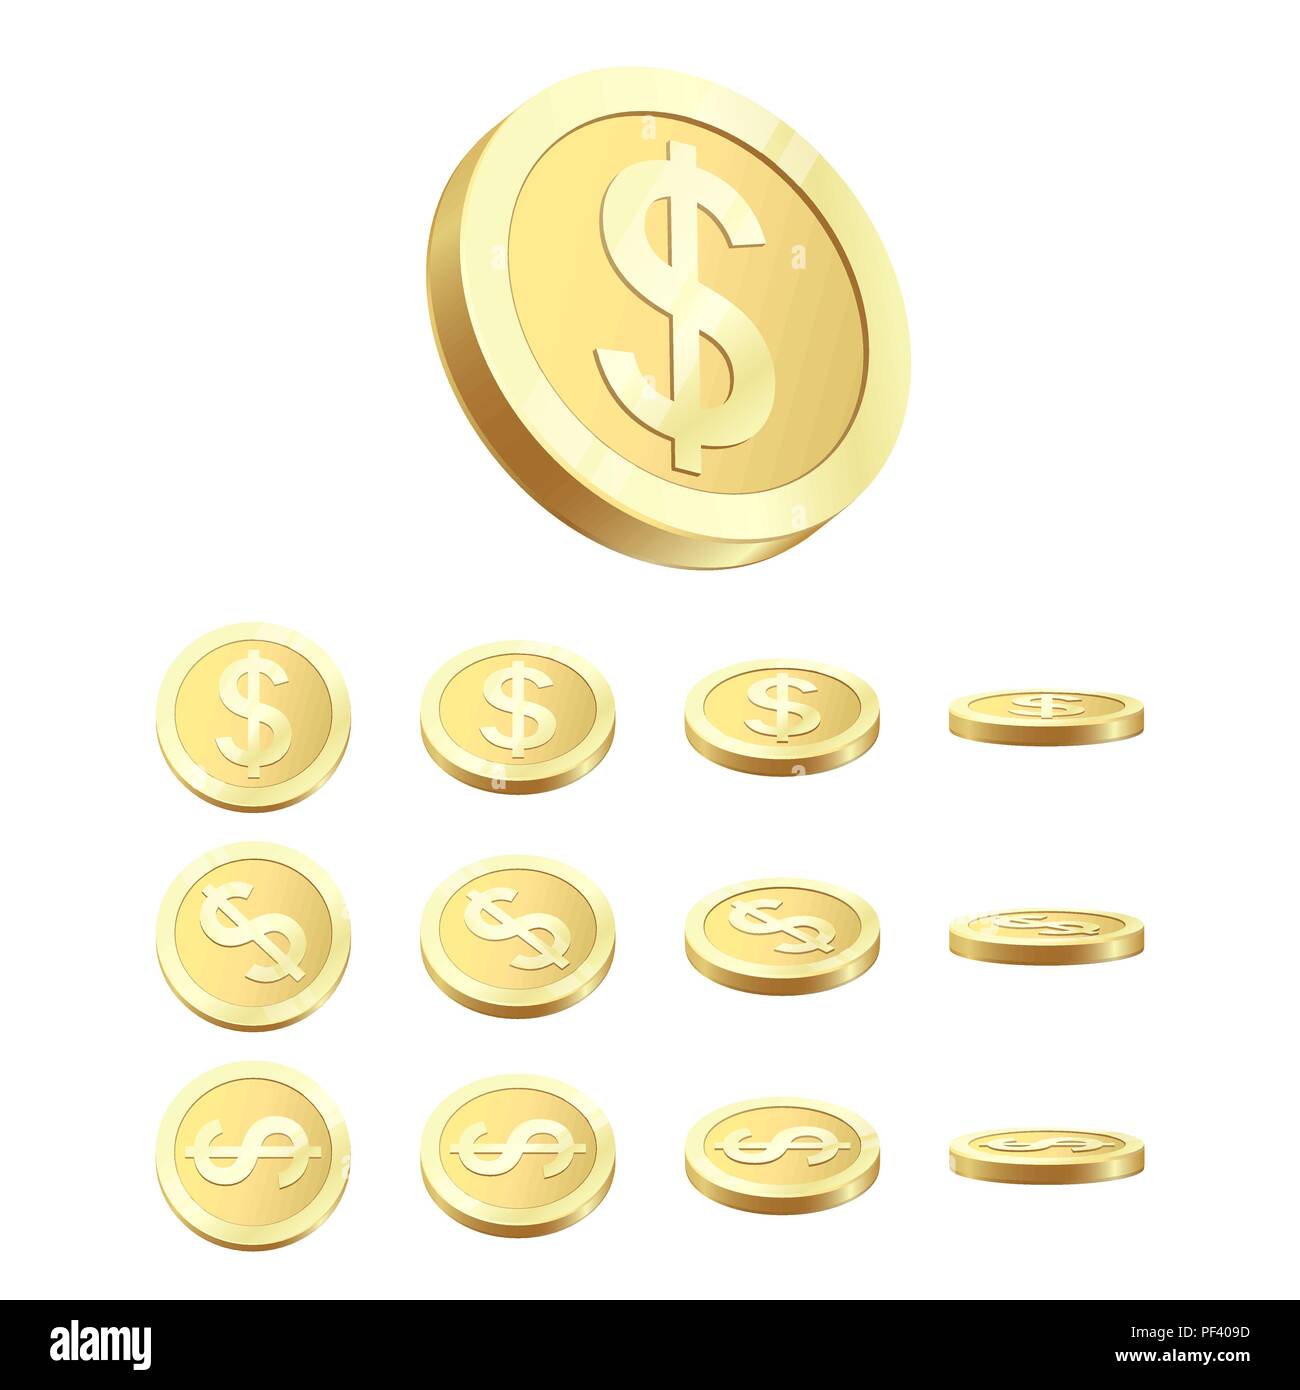 Golden Coin Set. Rotating 3D Golden Coin. Vector illustration isolated on white background Stock Vector